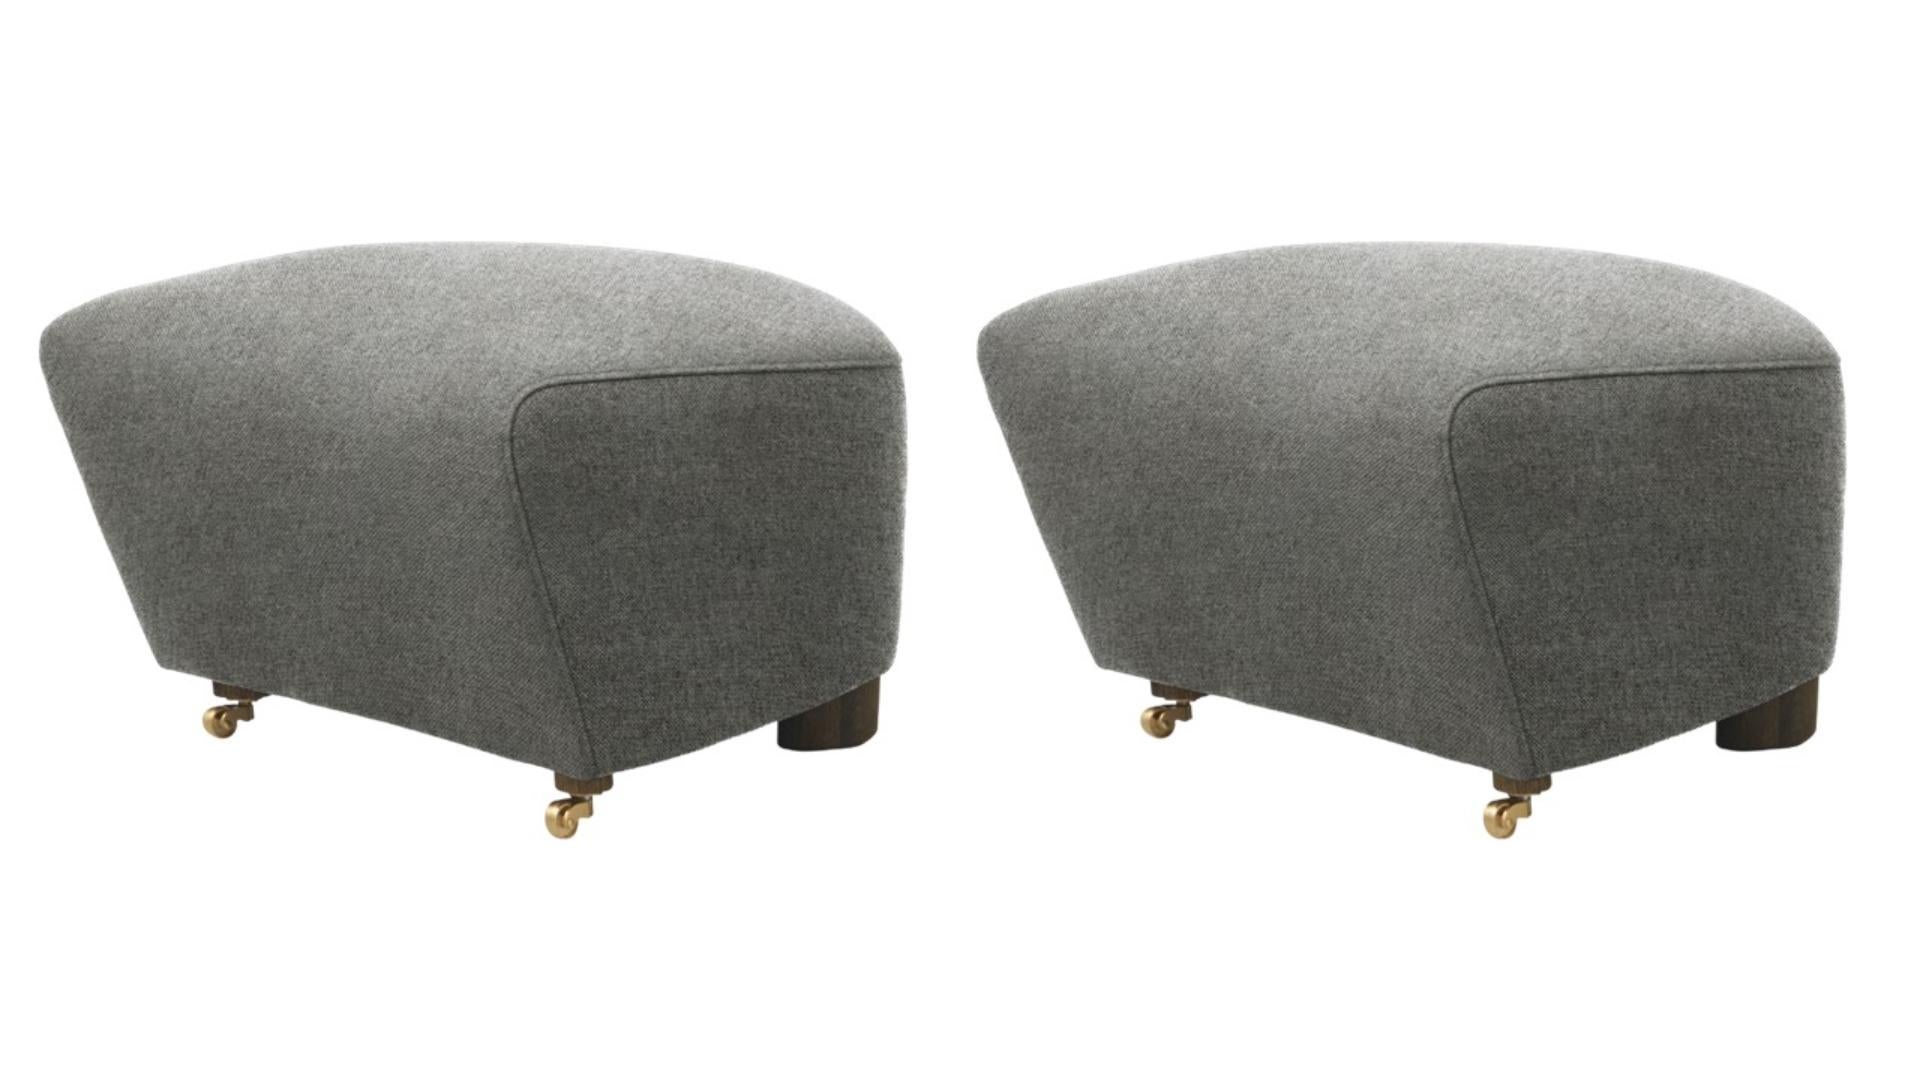 Set of 2 grey smoked oak hallingdal the tired man footstools by Lassen.
Dimensions: W 55 x D 53 x H 36 cm. 
Materials: Textile.

Flemming Lassen designed the overstuffed easy chair, The Tired Man, for The Copenhagen Cabinetmakers’ Guild